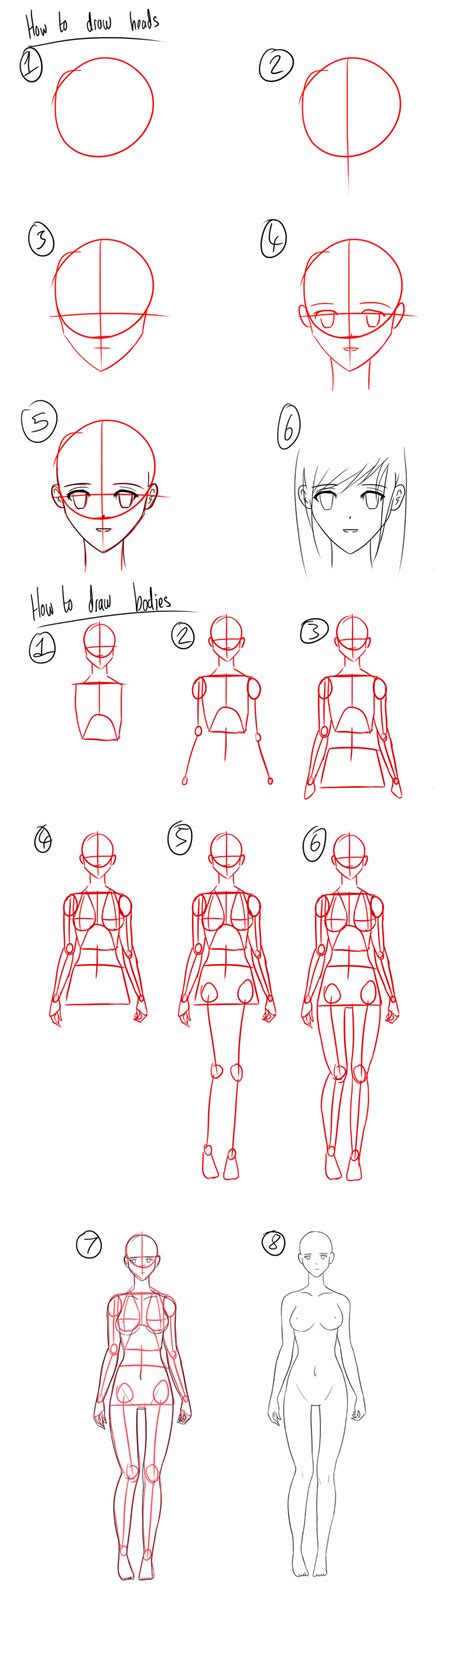 Finish with the hair, which can be designs. Tutorial - How to Draw Anime Heads/Female Bodies by Micky-K on DeviantArt